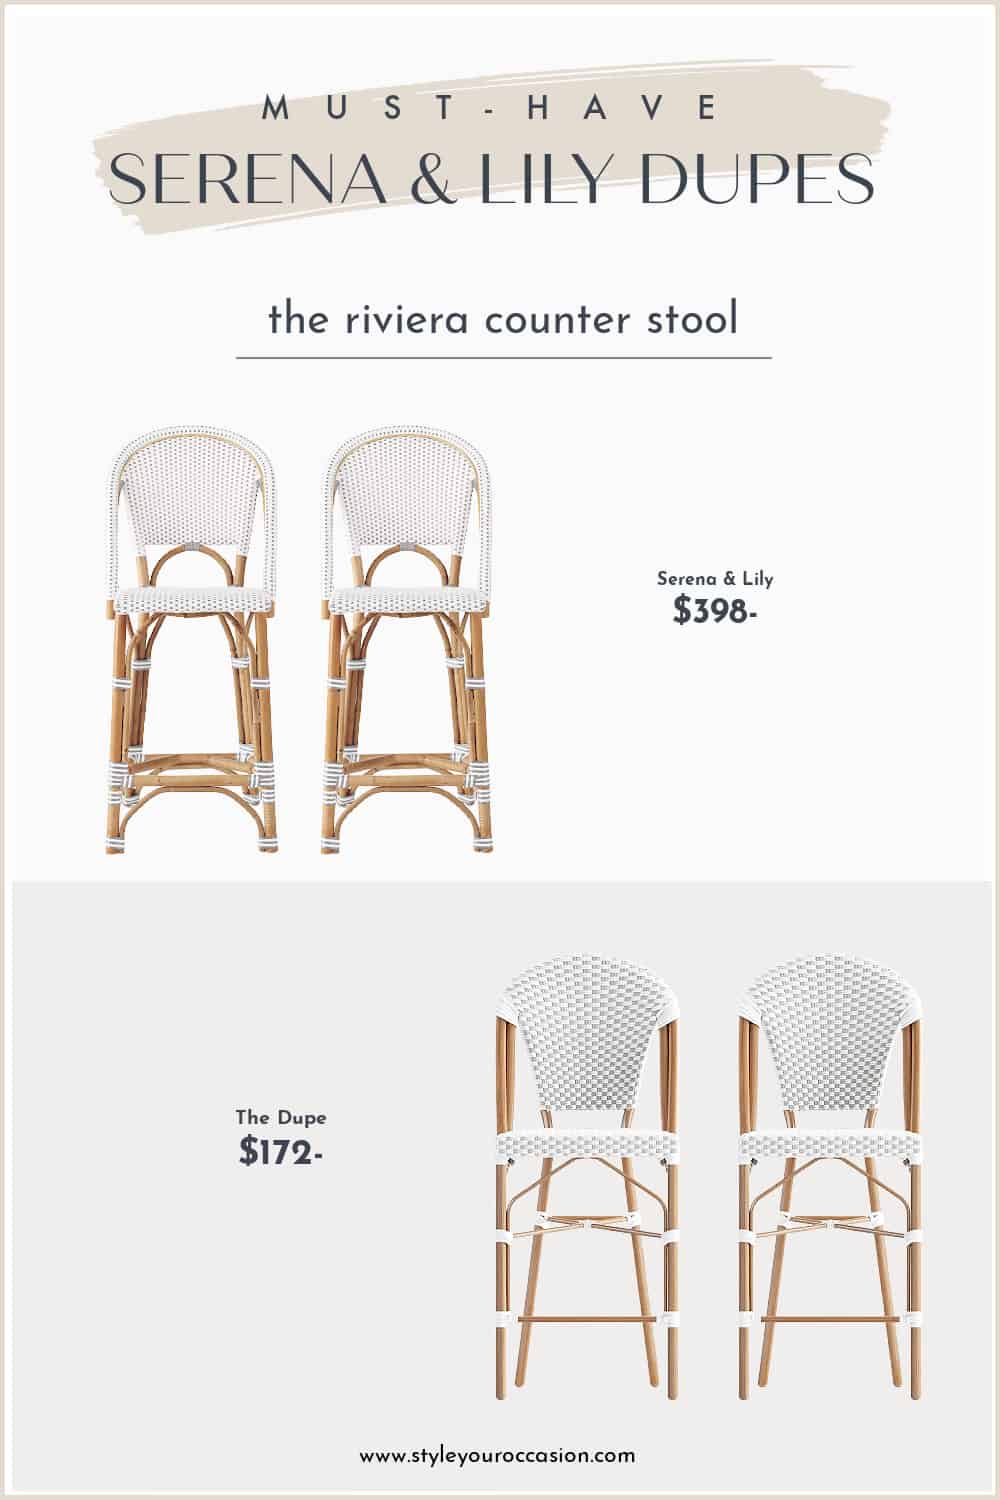 image comparing two bamboo counter stools with grey and white weaving, one Serena and Lily dupe and the original stool